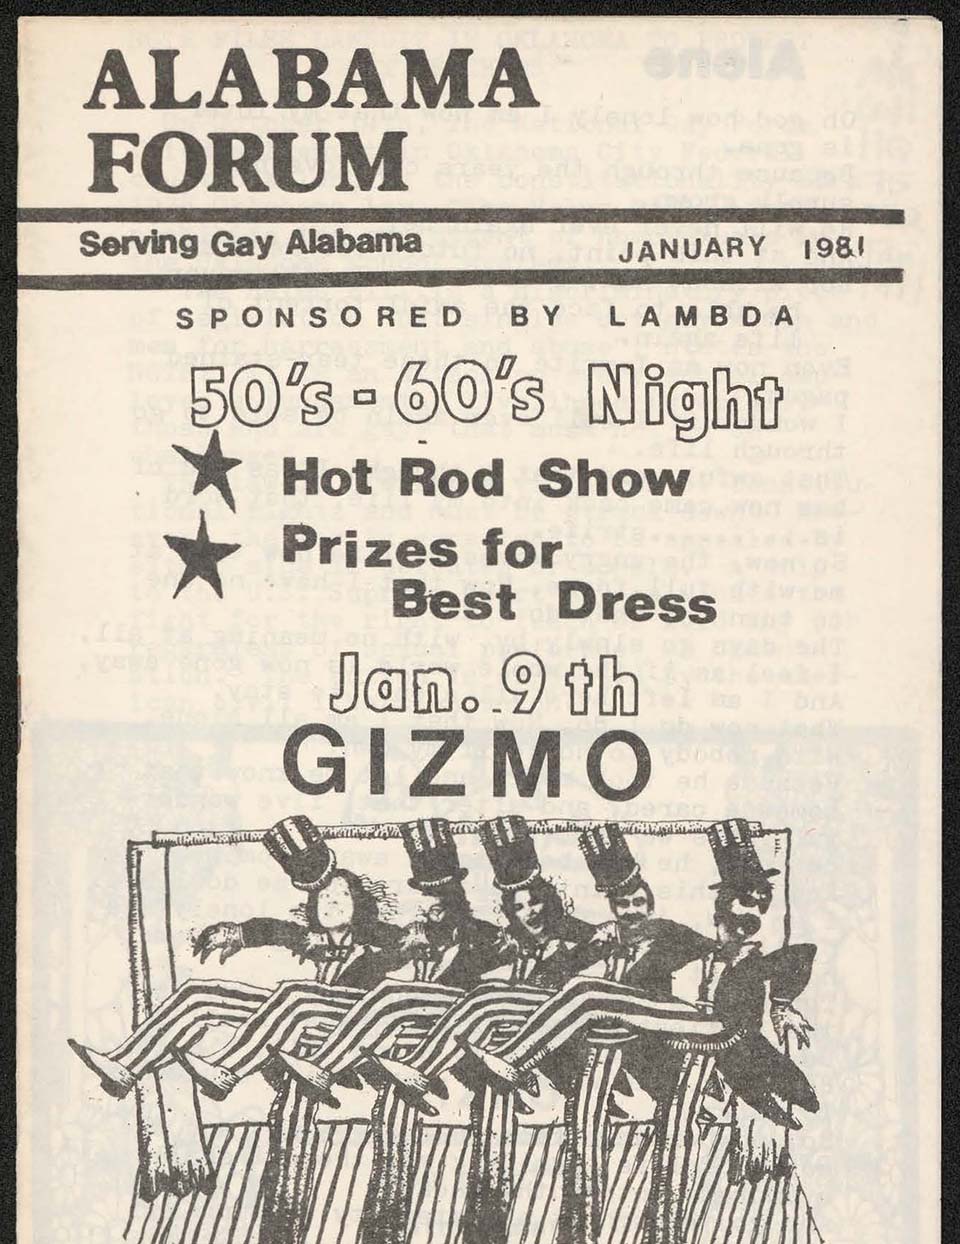 The cover of Alabama Forum, January 1981